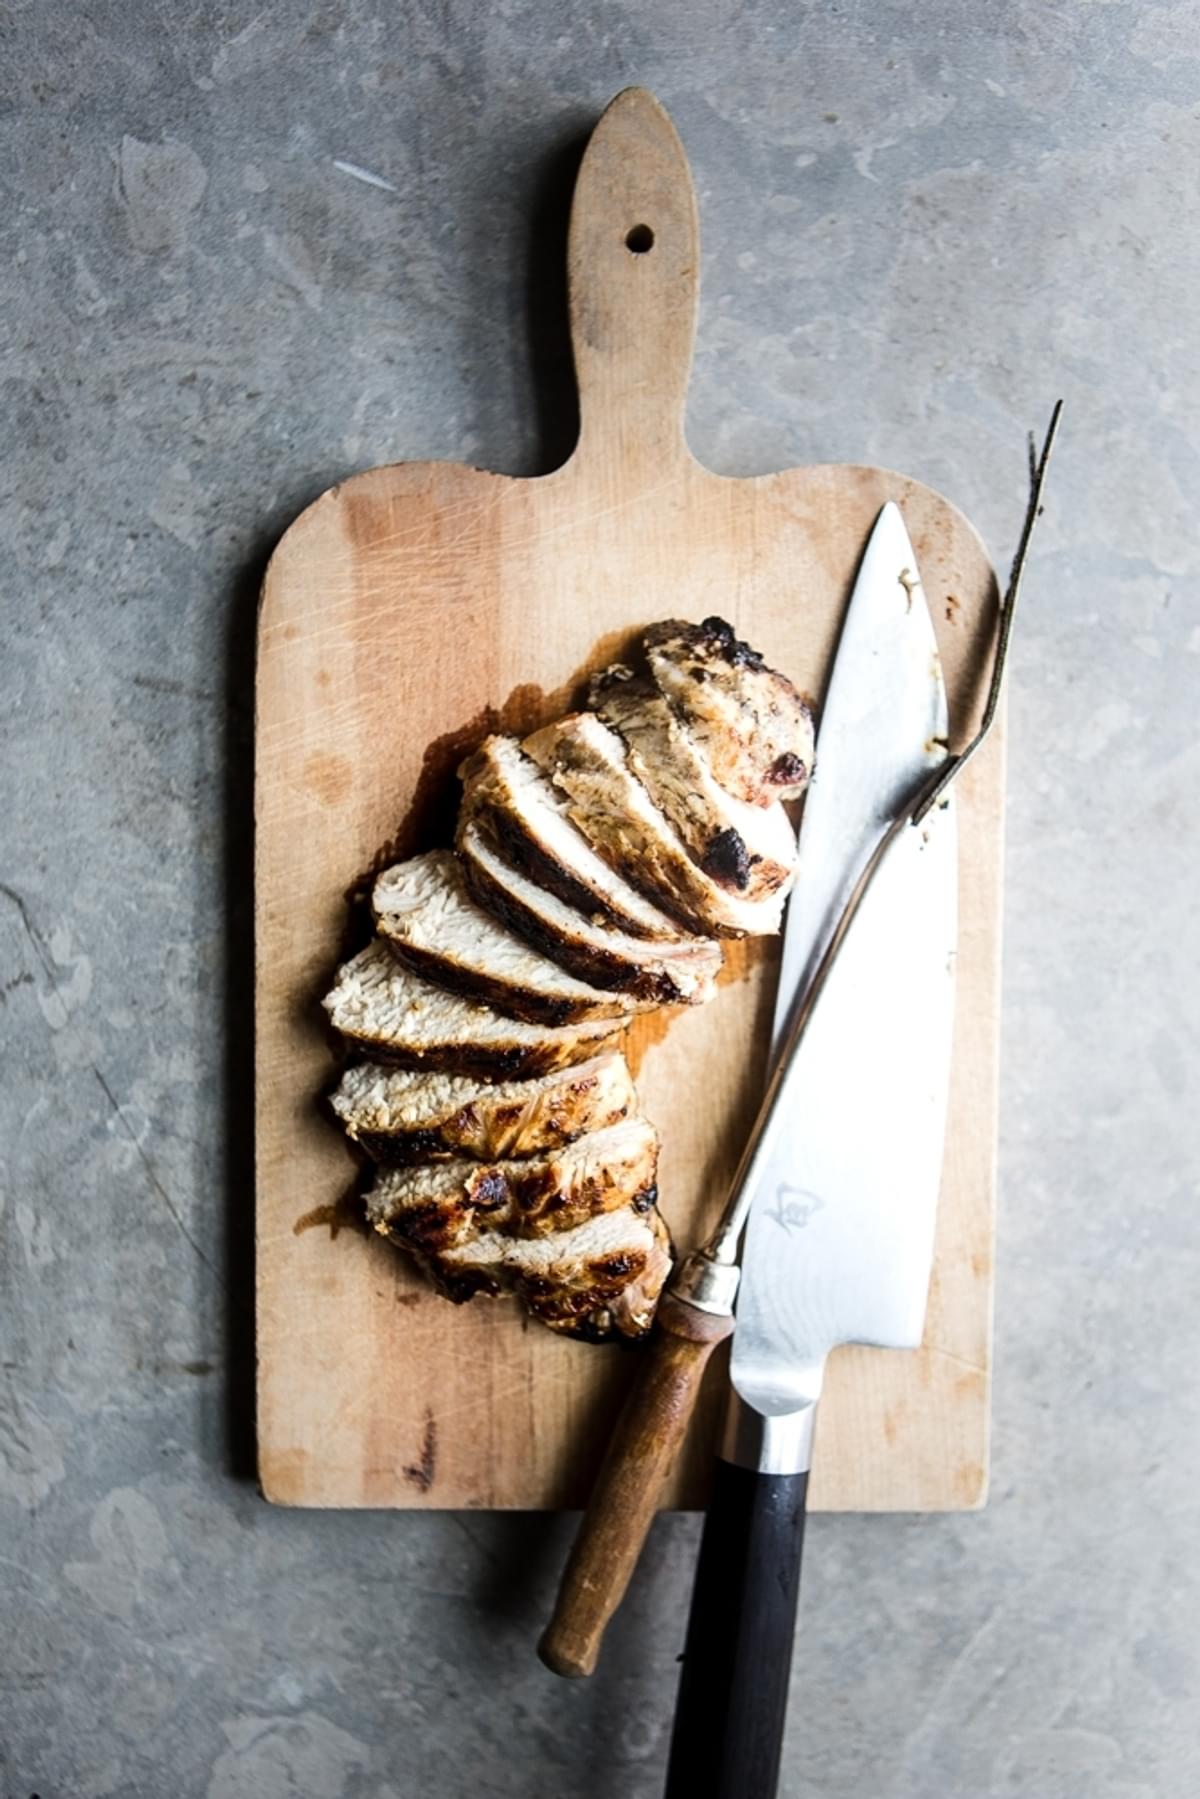 grilled chicken breast sliced on a cutting board with a knife and serving fork